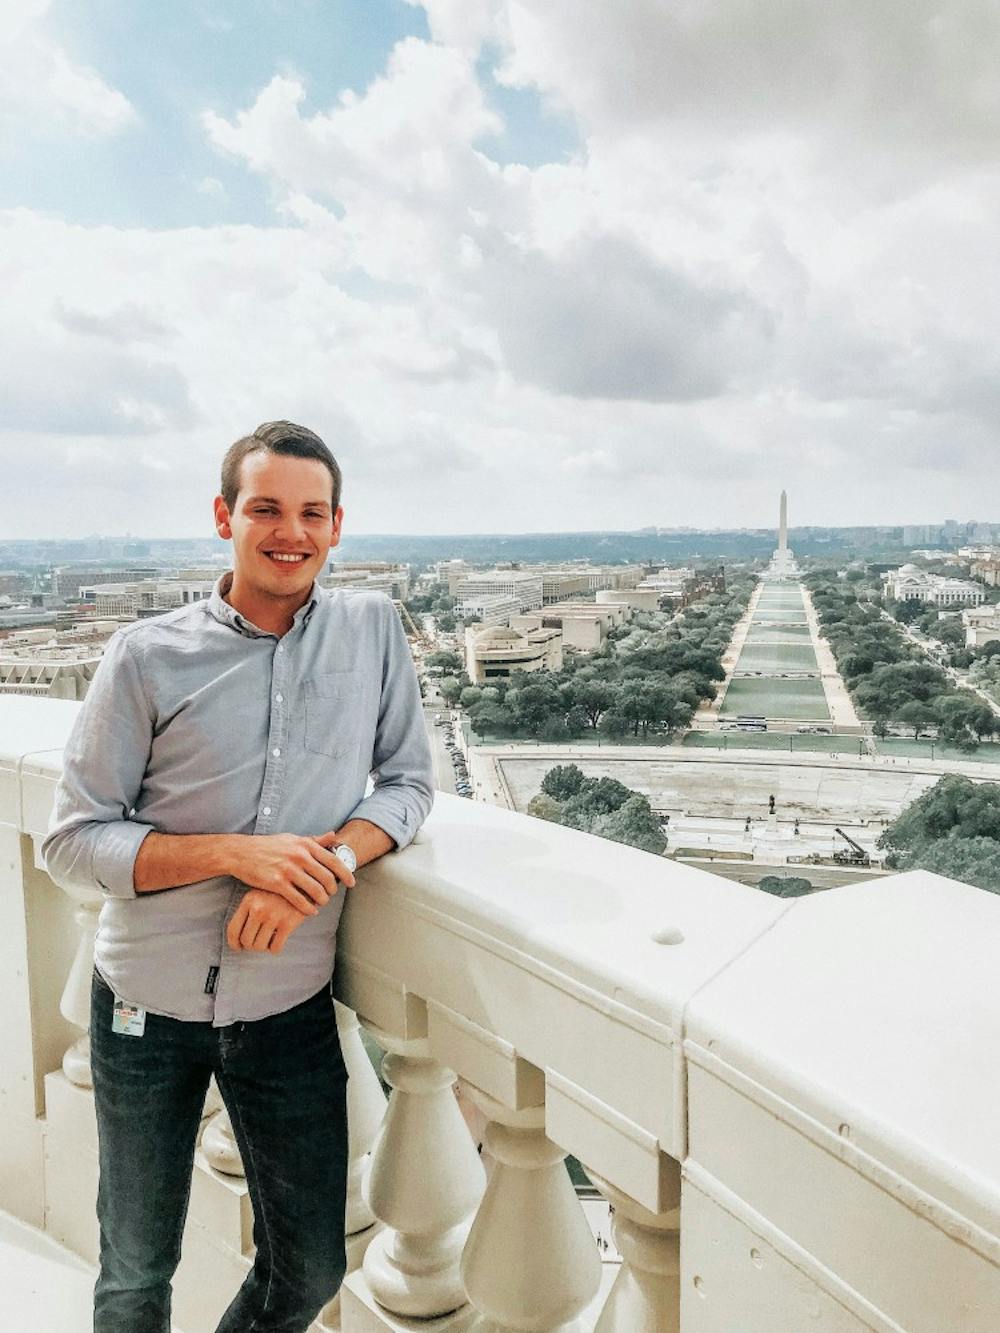 Ryan Ritchie, class of 2018, spent his summer interning at the White House with the Office of Presidential Correspondence. Ritchie aided in communication between the American people and President Trump. PHOTO PROVIDED